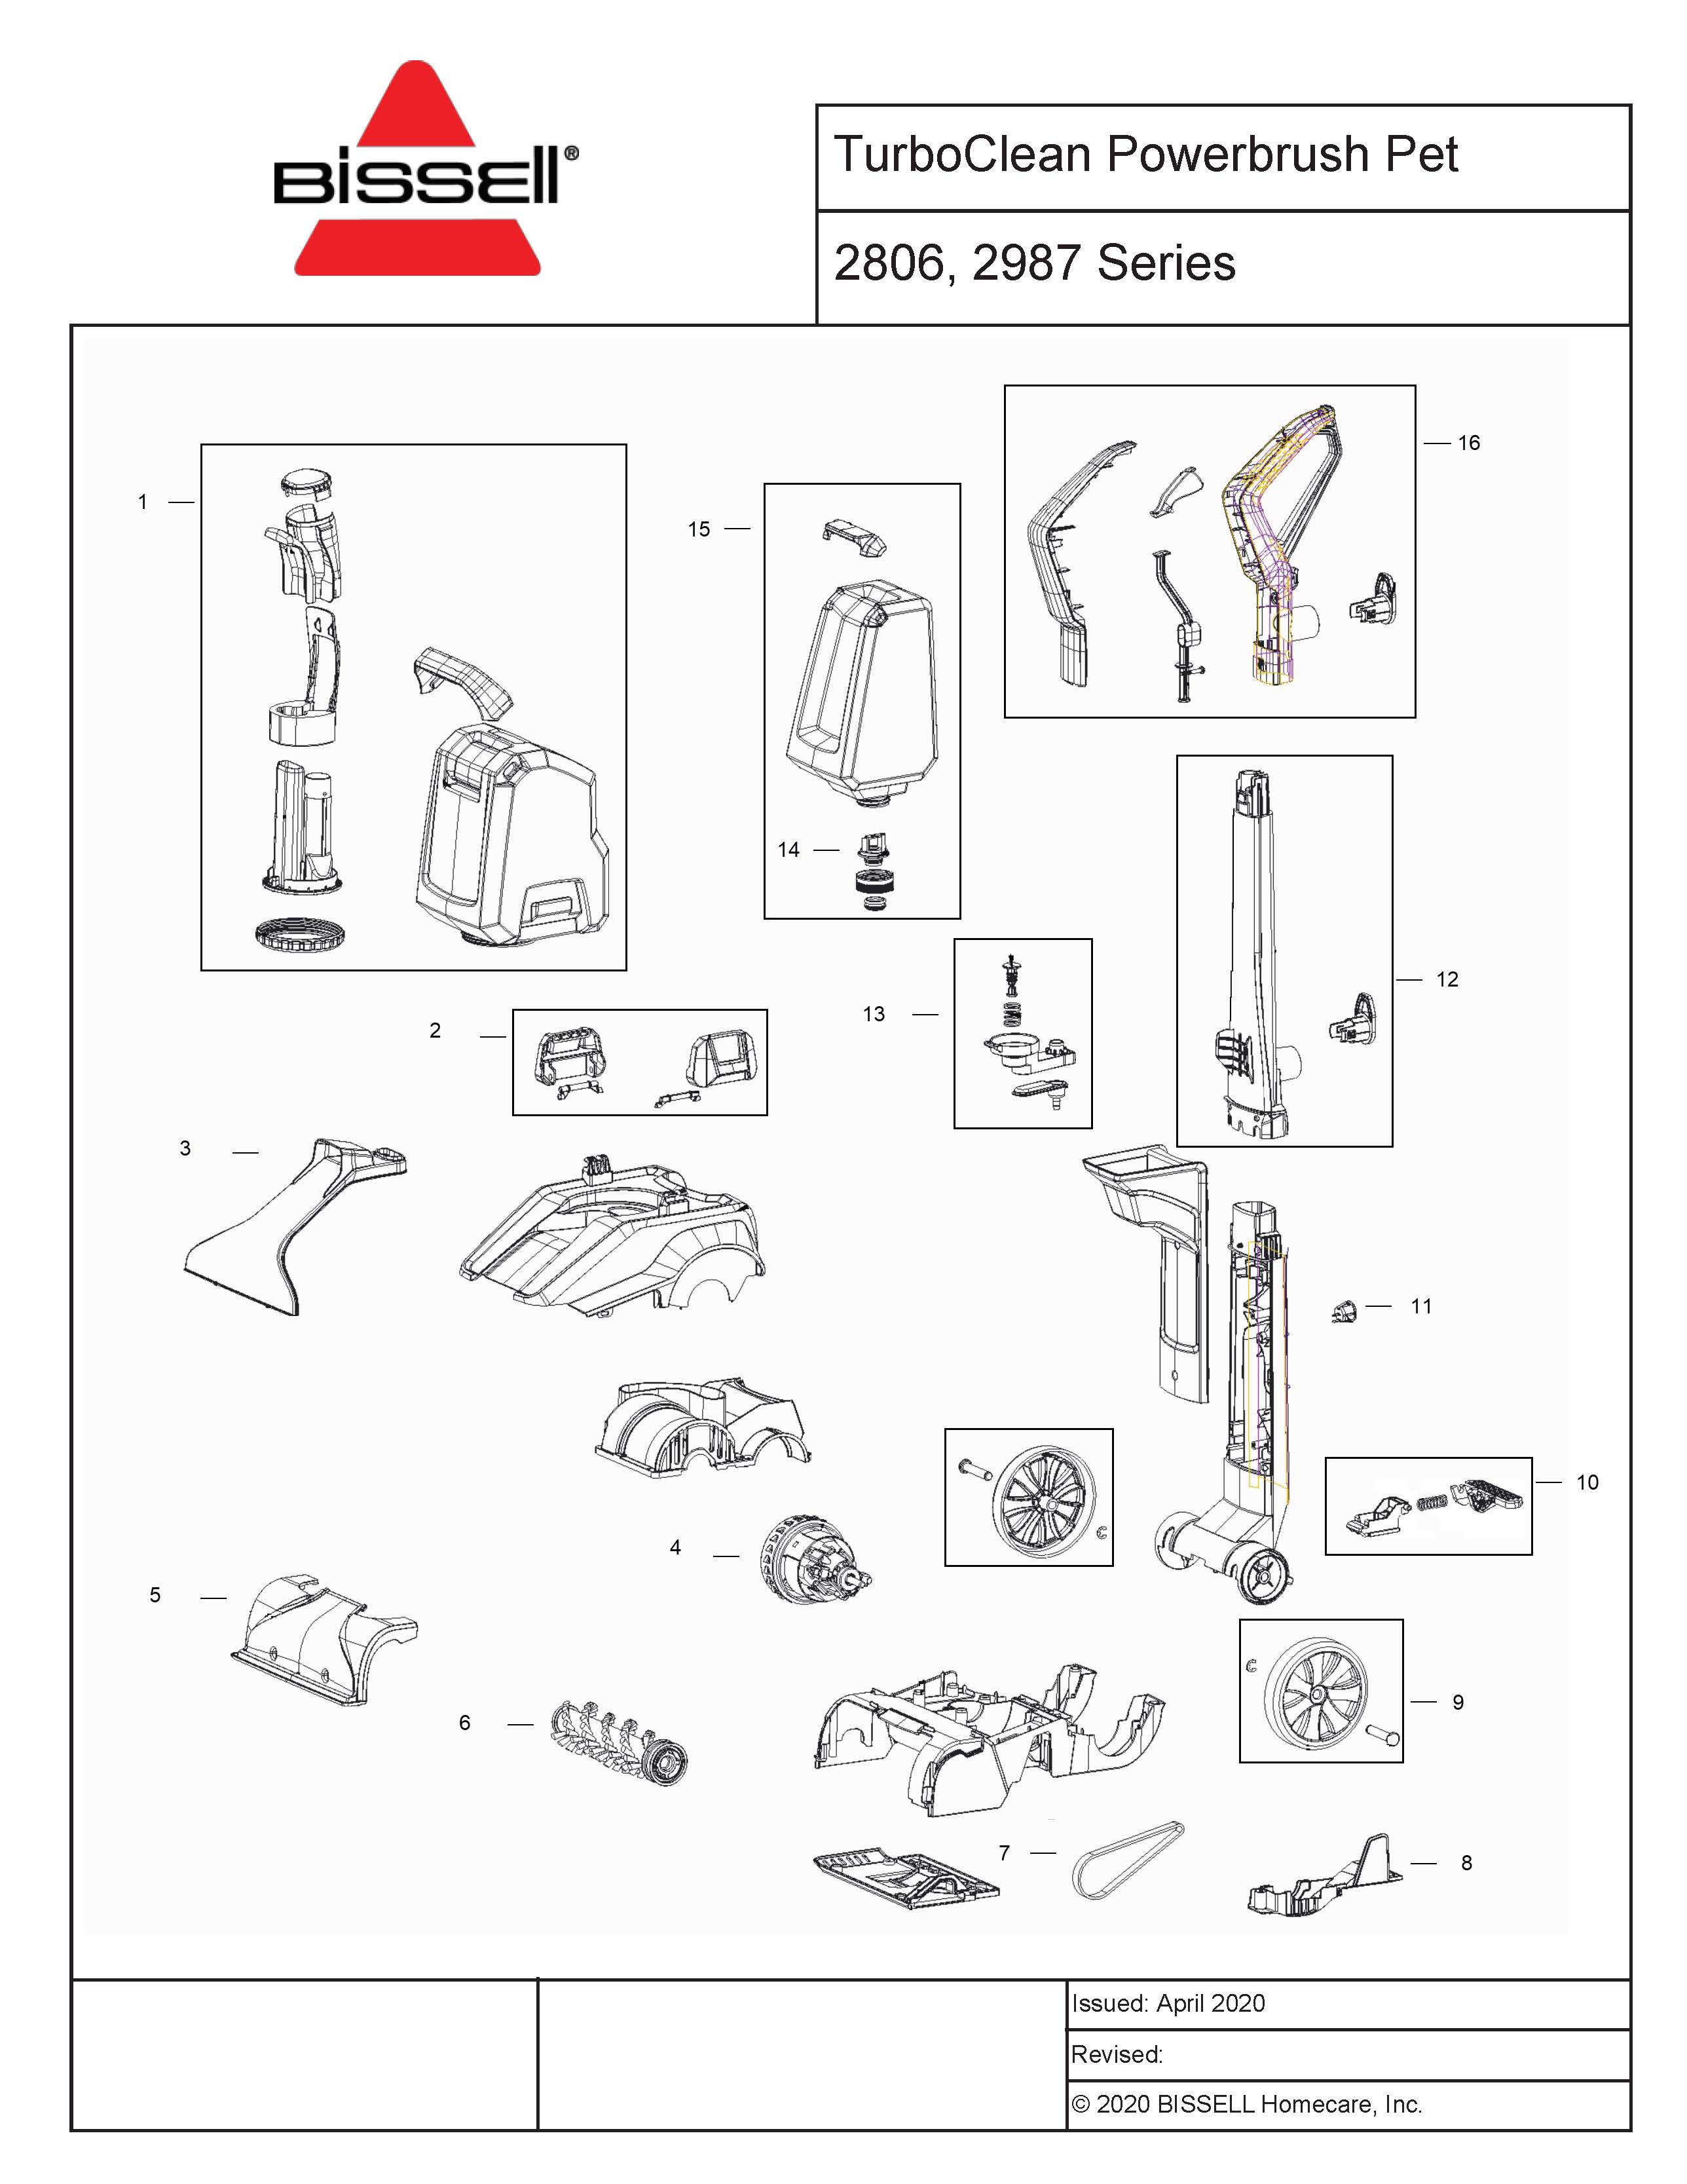 Schematic Parts Book for Bissell Model: 2987 TurboClean PowerBrush Pet -  VacuumsRUs